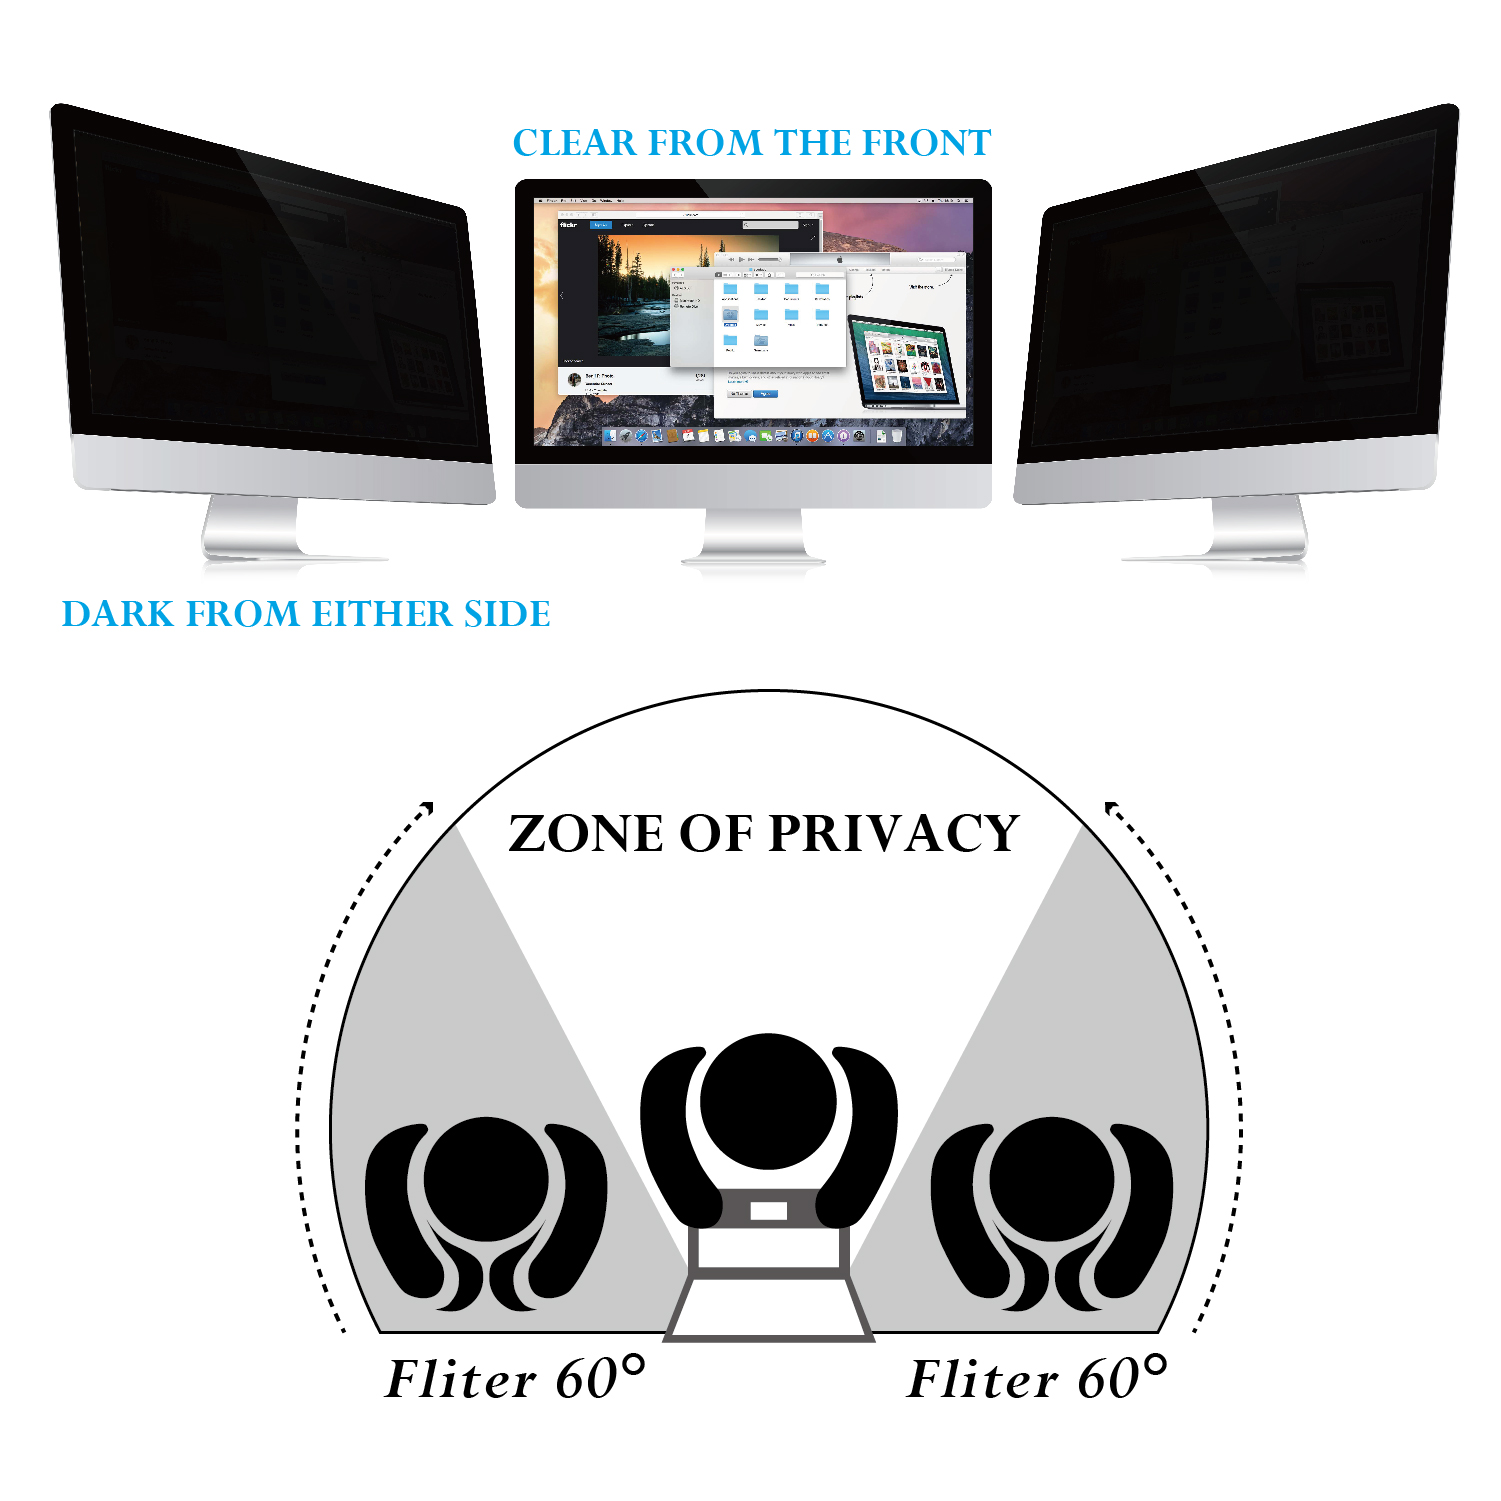 LCD screen will be completely black when viewed from left or right at the 35 degree angle; Keeps your personal or confidential information safe from prying eyes